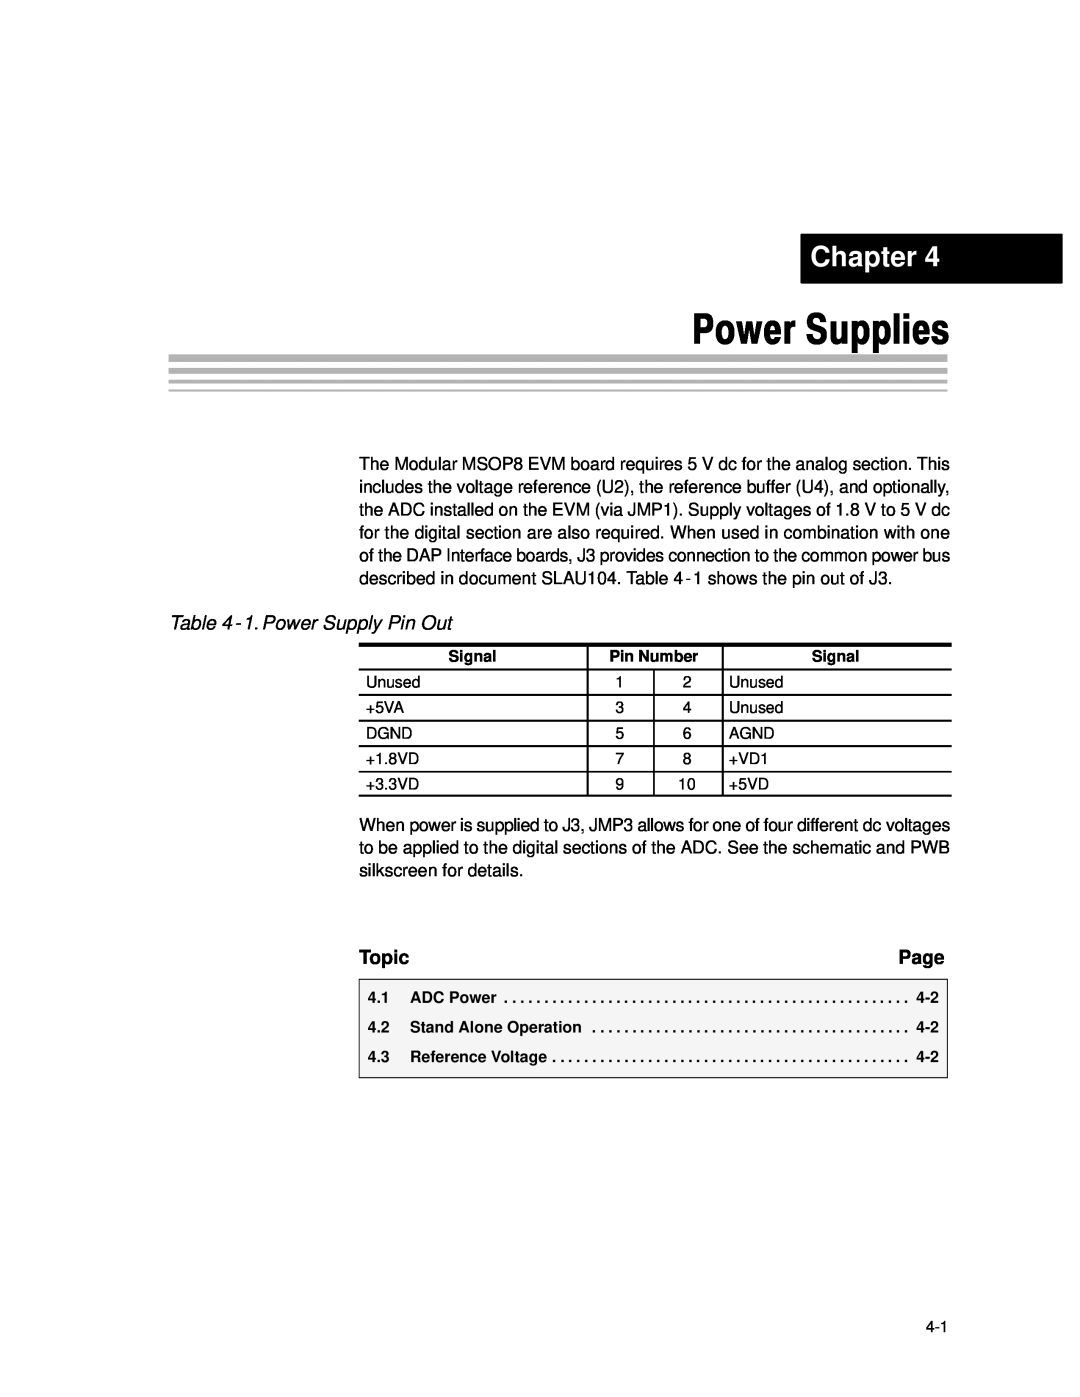 Texas Instruments MSOP8 manual Power Supplies, 1. Power Supply Pin Out, Chapter, Page, Topic 